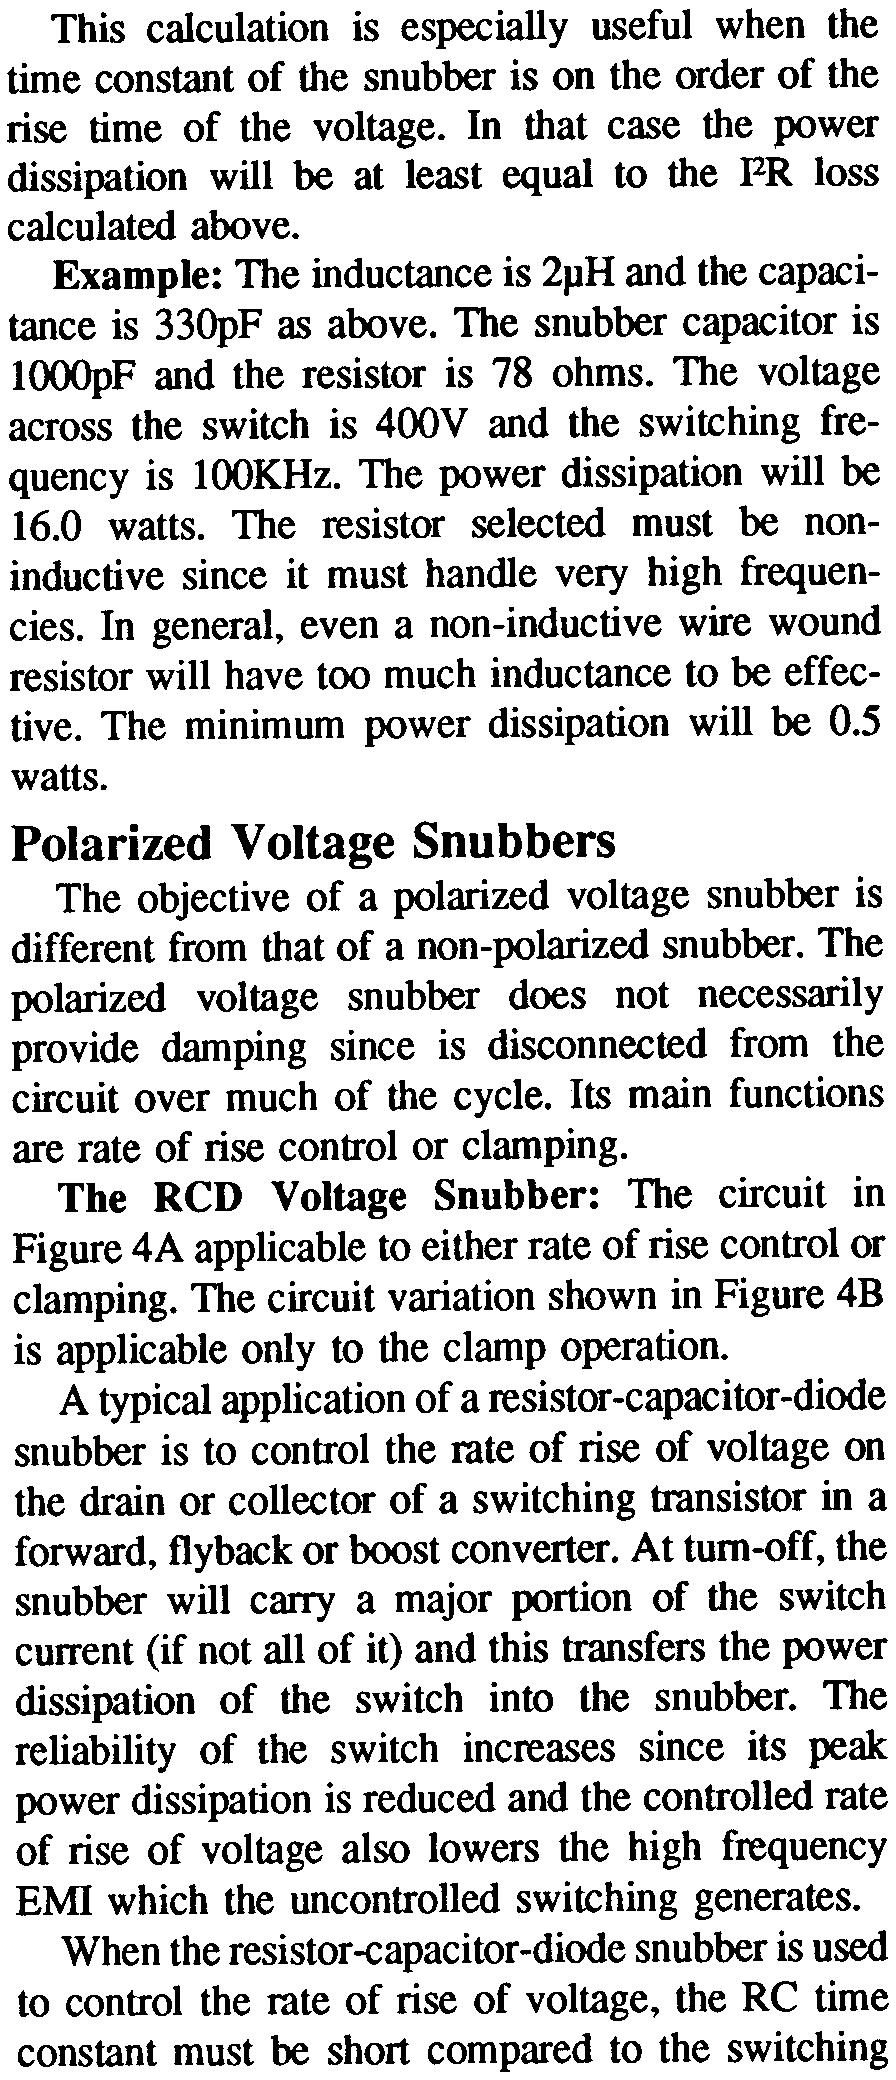 If the time constant is too long the equations are not valid and the estimated power will again be too high. The capacitor in a snubber stores energy.